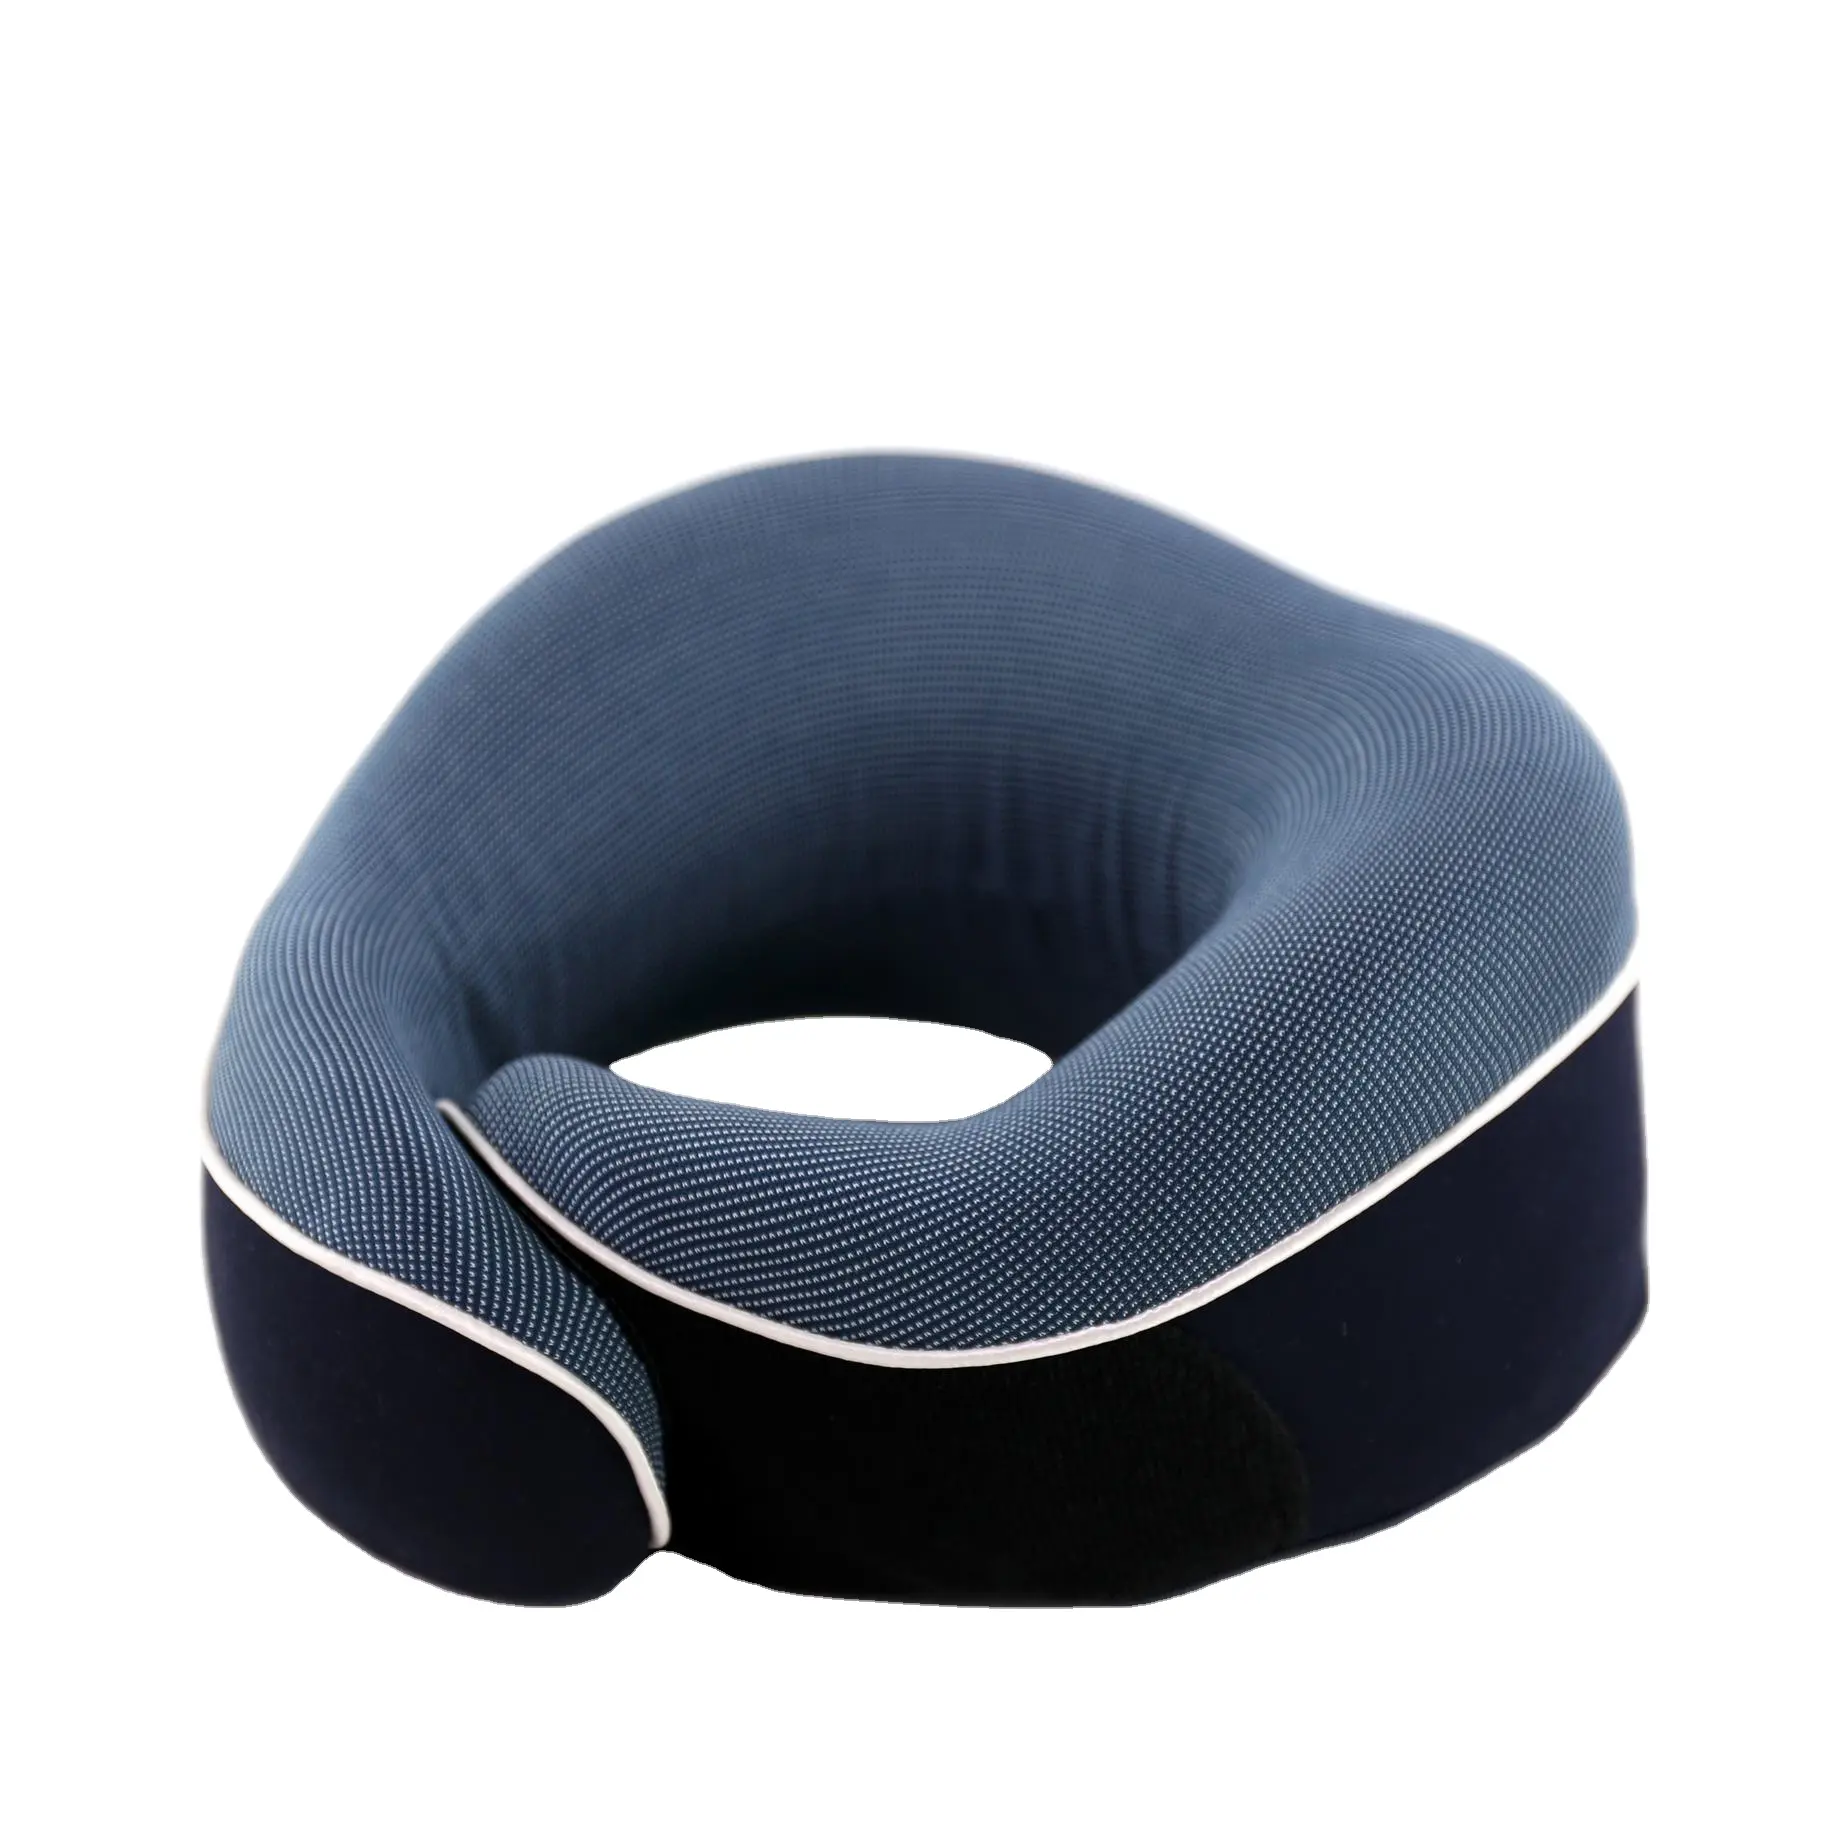 Factory Direct Price Portable Foldable Memory Foam Train Car Airplane Travel Neck Pillow U-shaped neck Support Nap Pillows